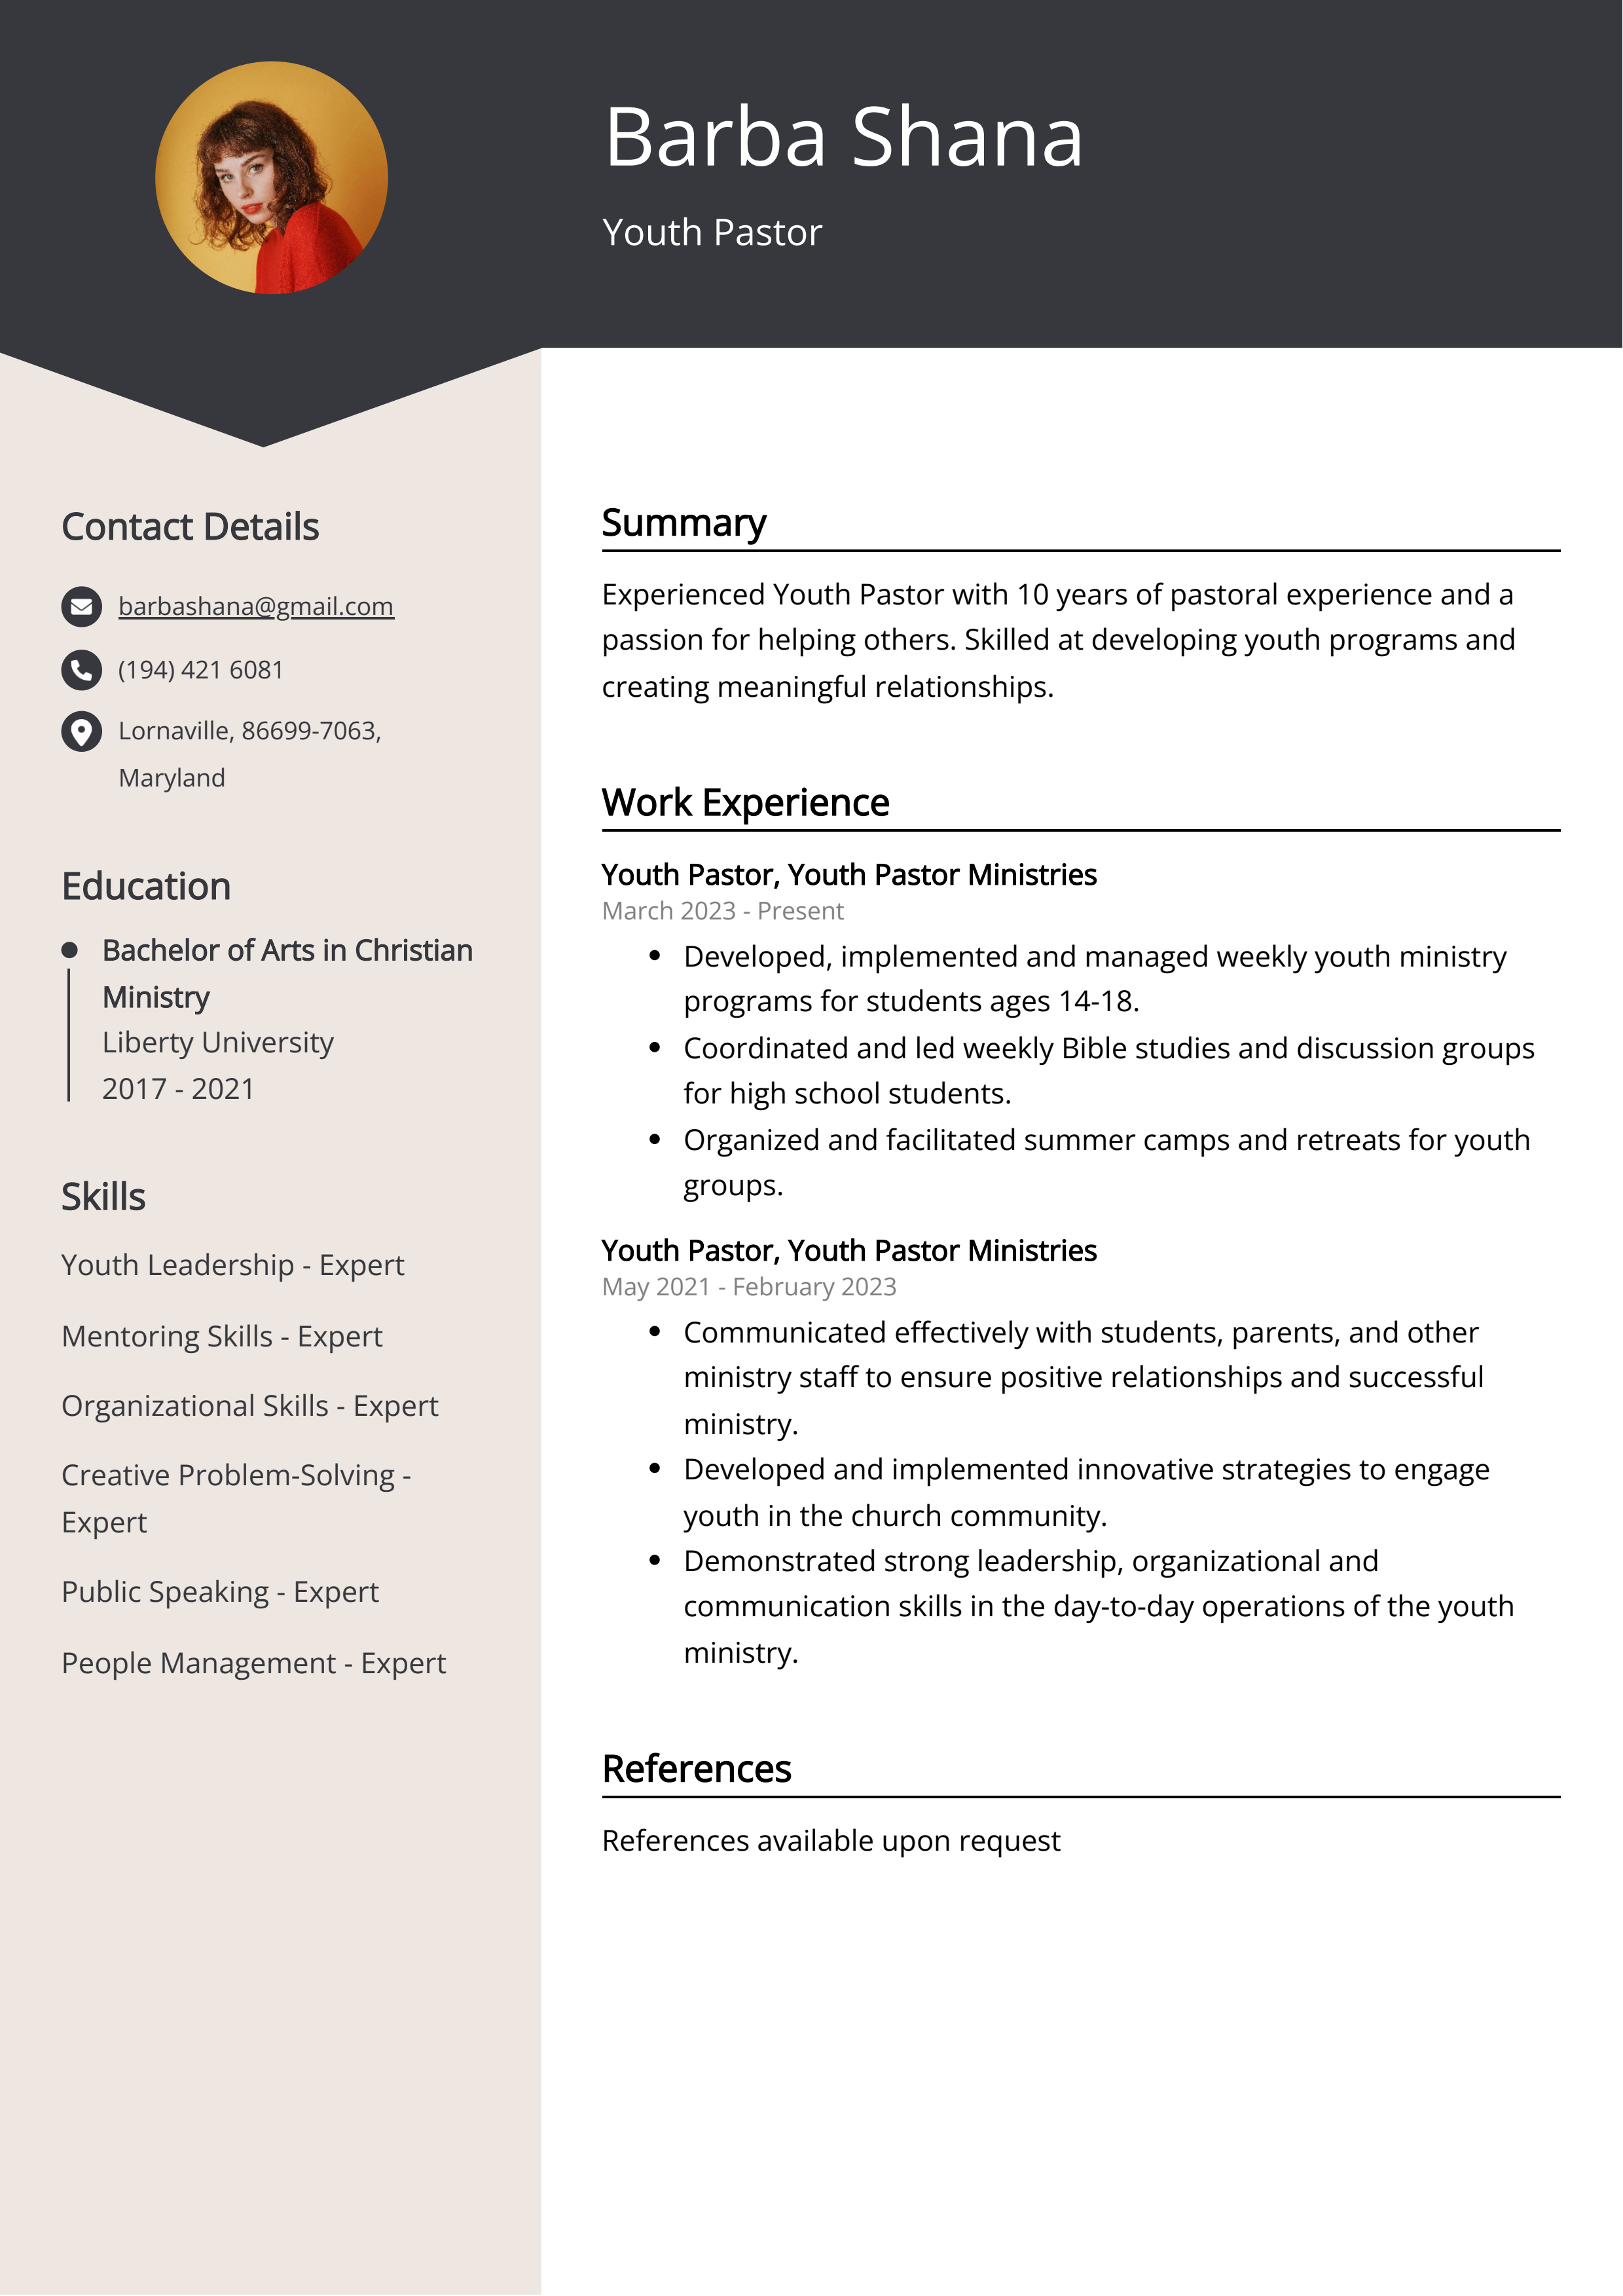 Youth Pastor CV Example